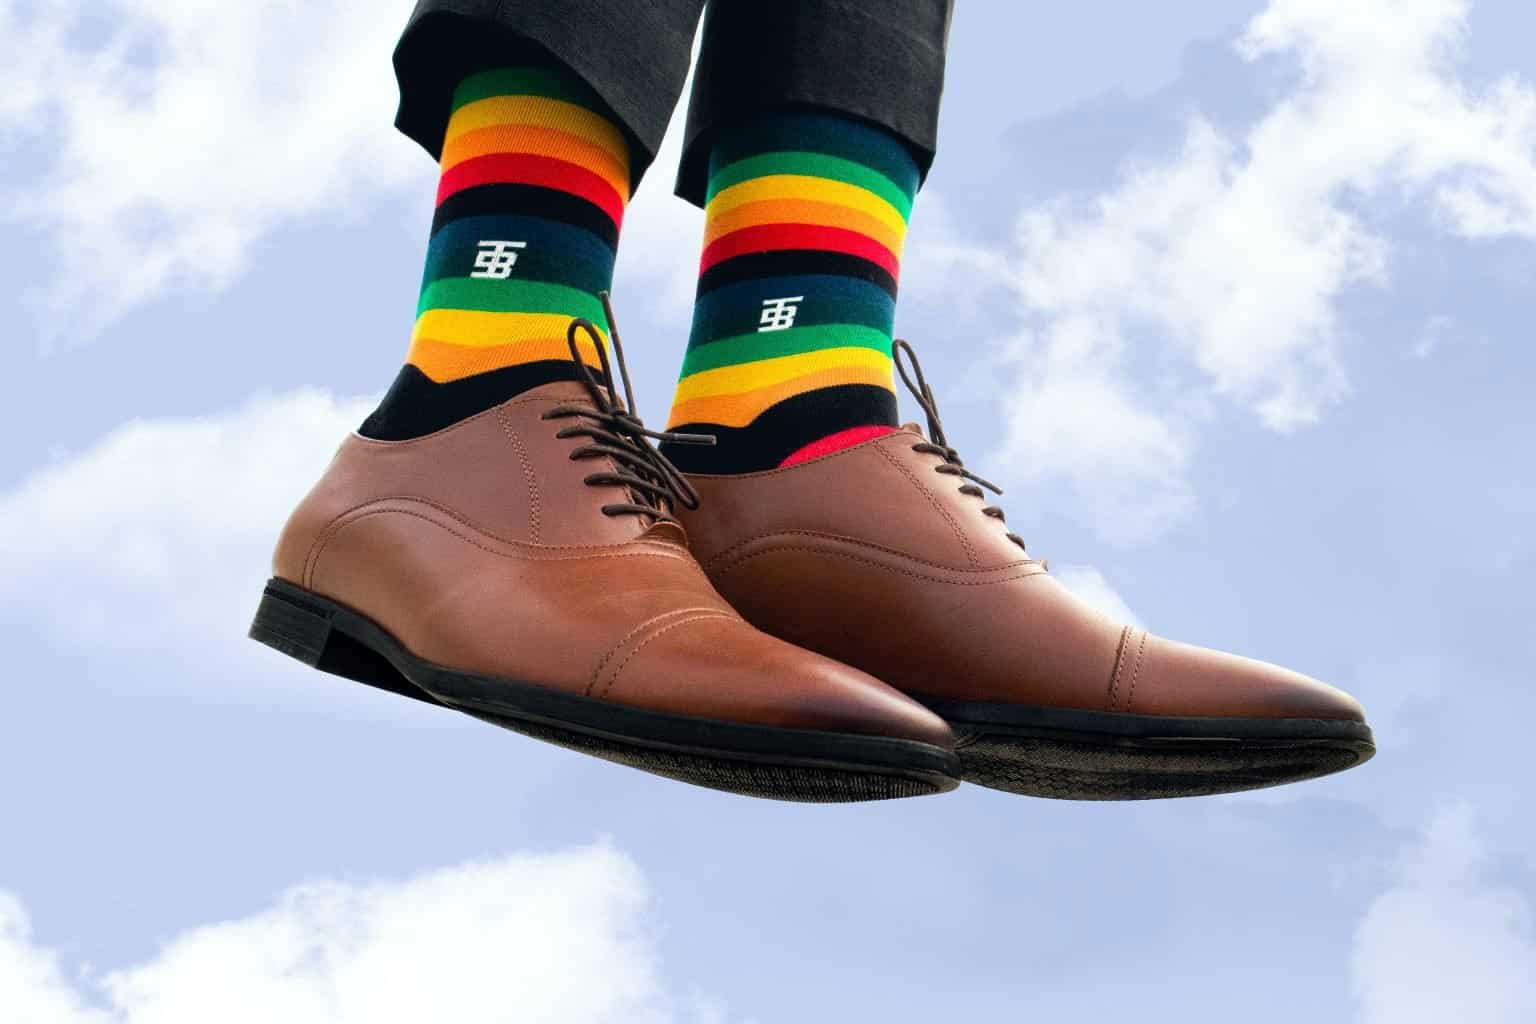 Is There Any Difference Between Left And Right Socks? - Men's Features